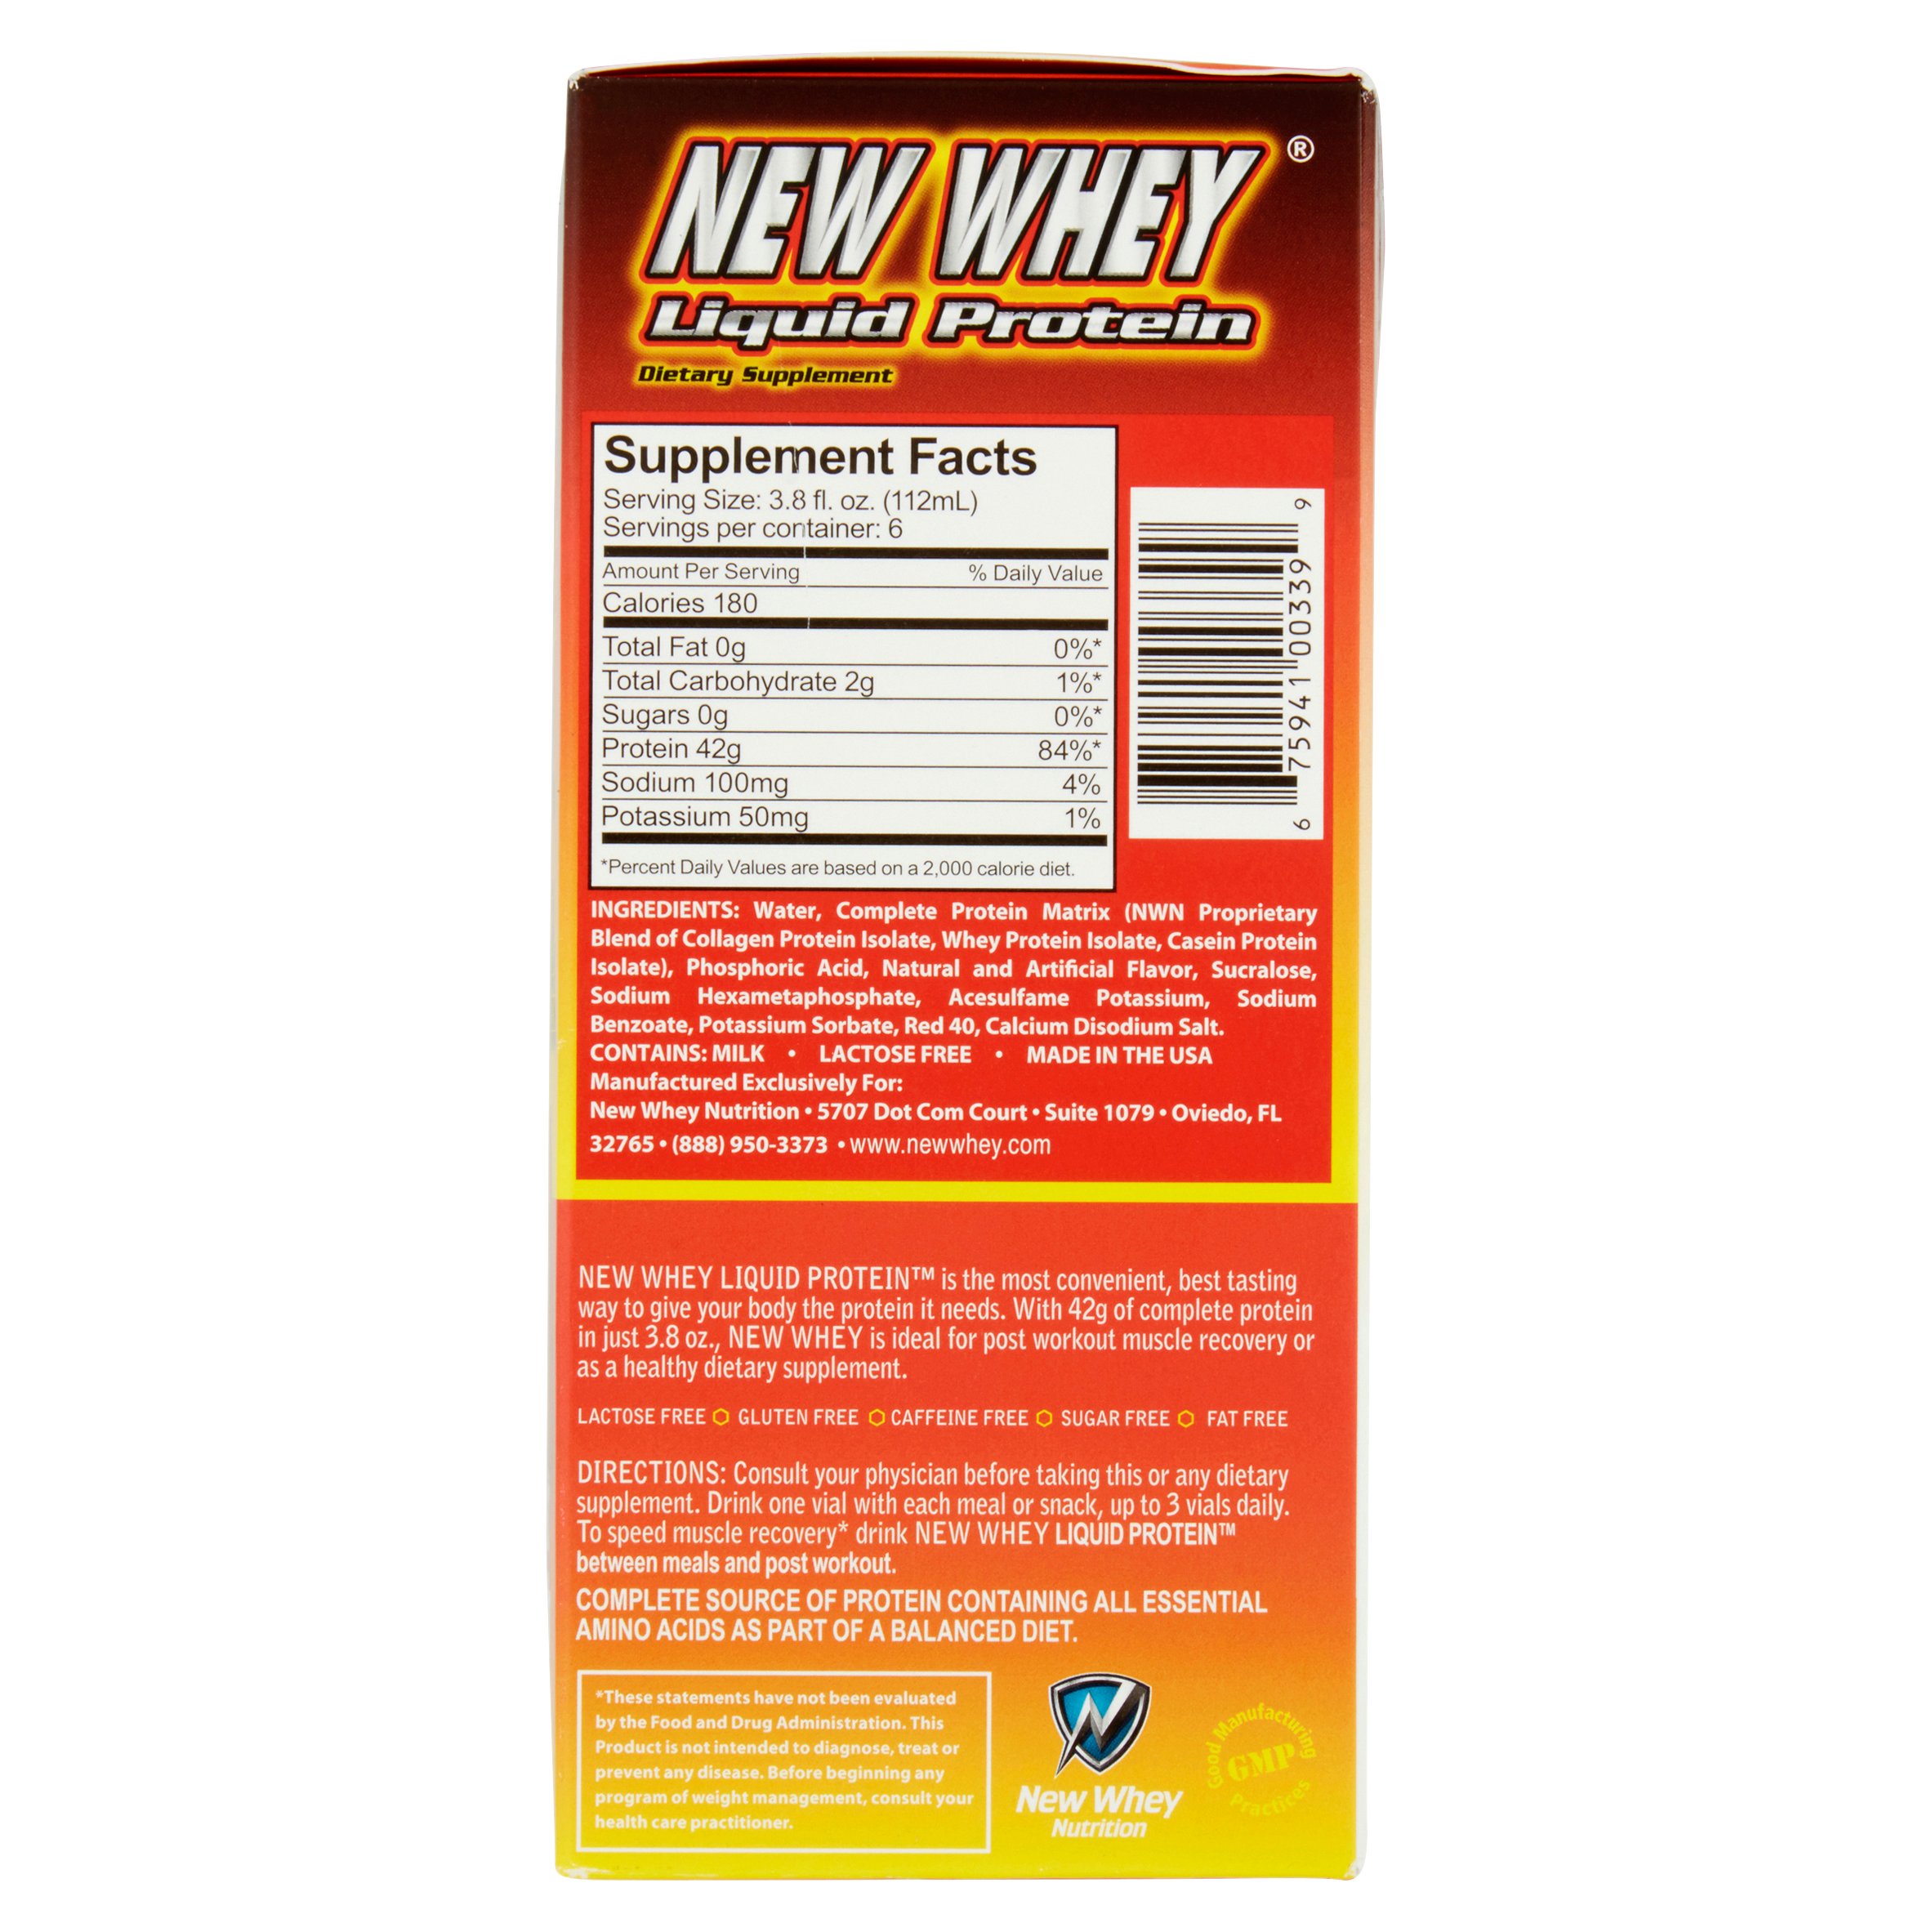 New Whey Protein Drink, 42 Grams of Protein, Fruit Punch, 3.8 Oz, 6 Ct - image 5 of 5